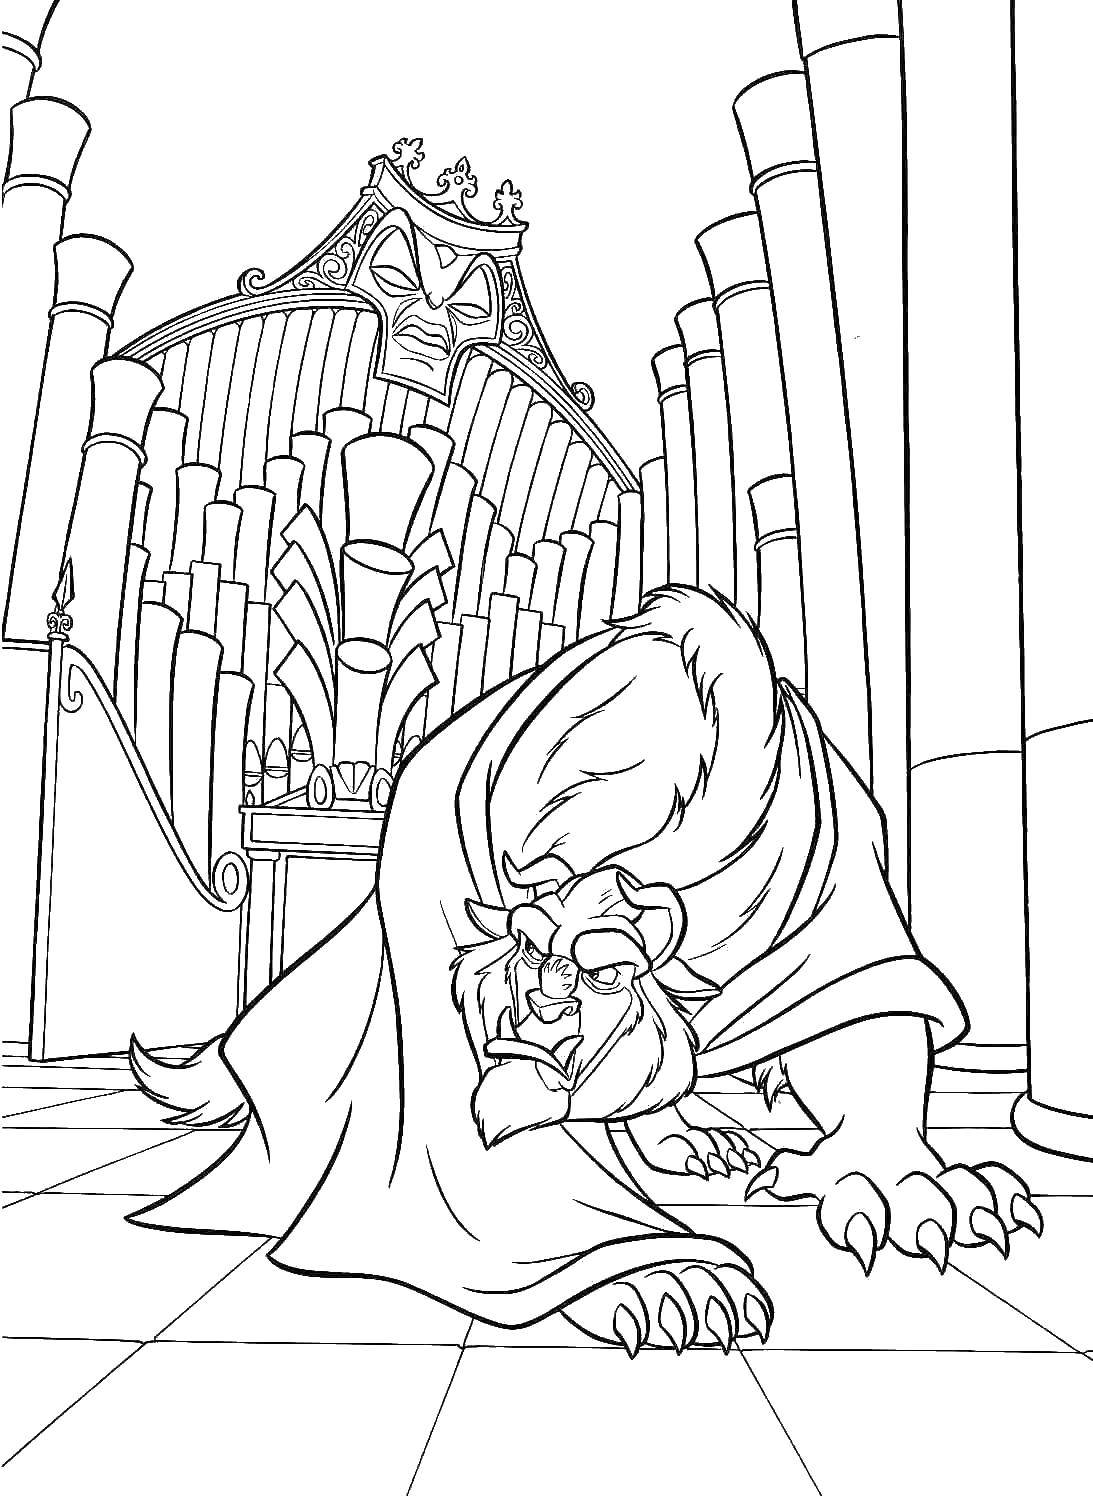 Coloring Beast cartoon beauty and the beast. Category Disney cartoons. Tags:  Disney cartoons, the Beast and Beauty, Princess.